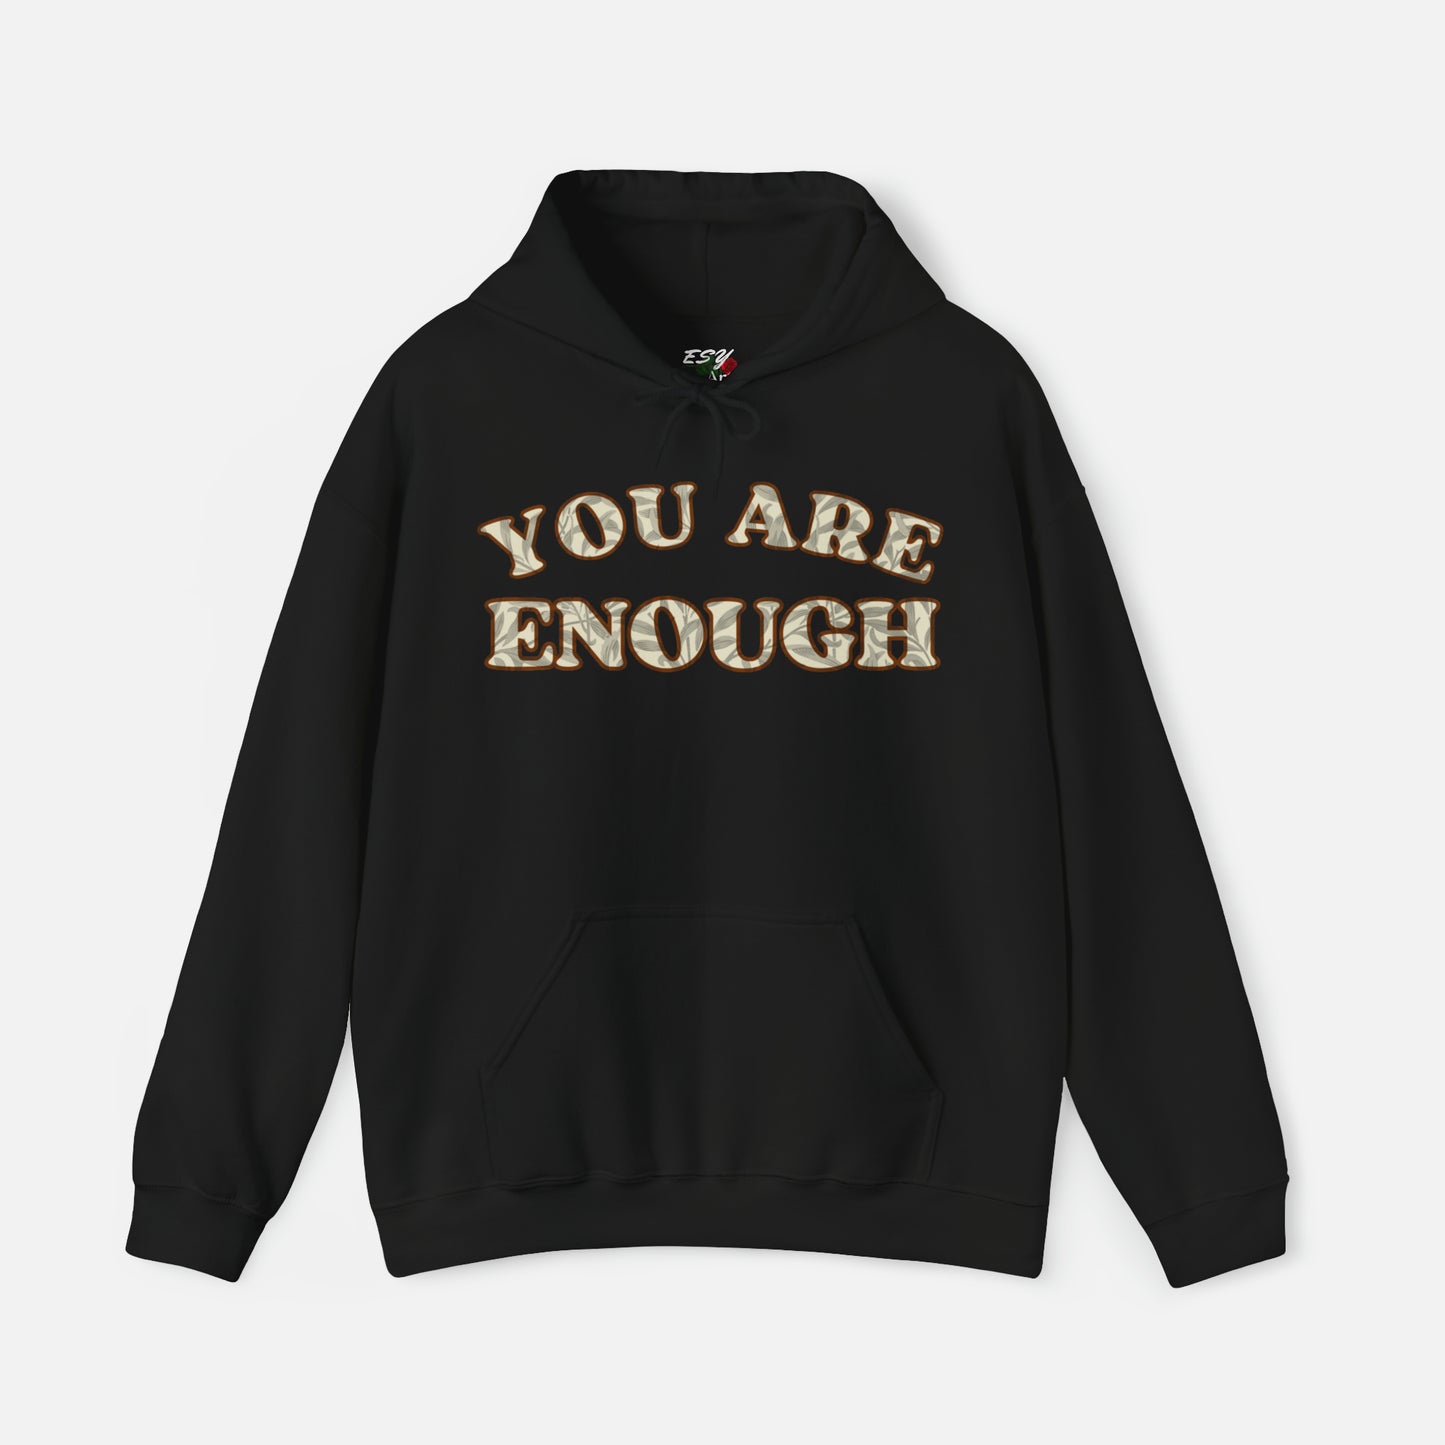 You Are Enough - Hoodie